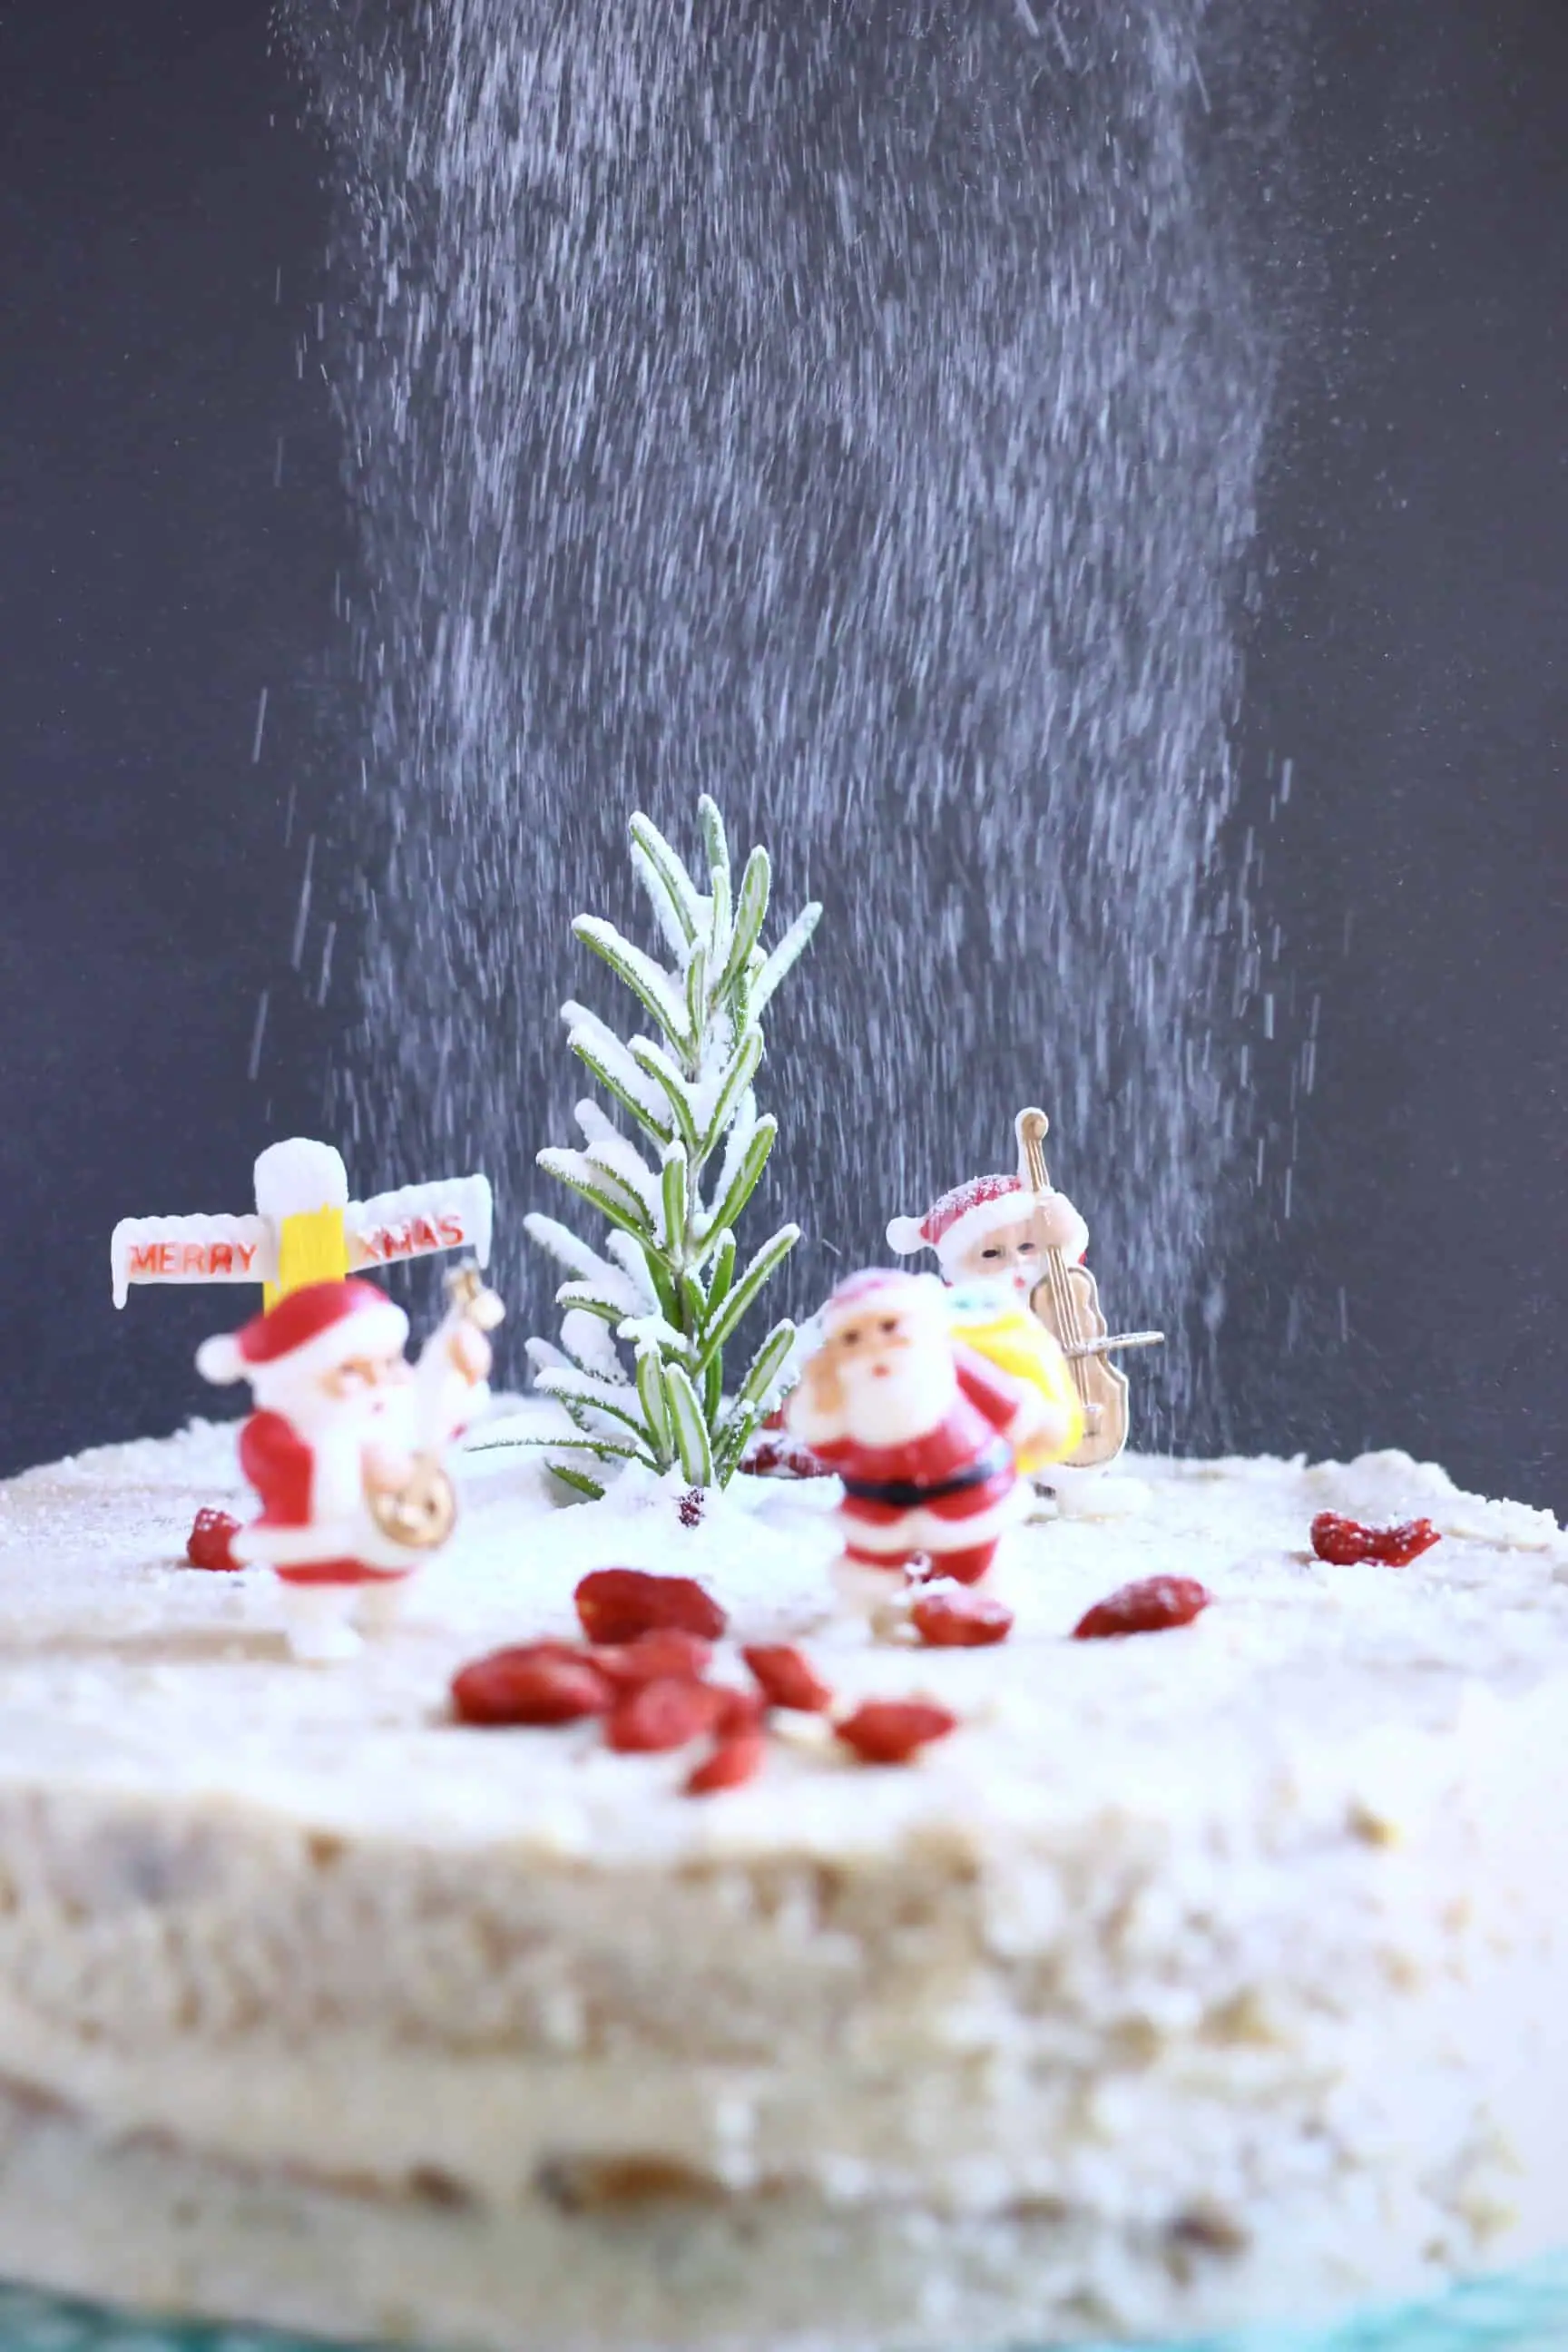 A gluten-free vegan Christmas fruit cake covered in white buttercream topped with plastic santas against a grey background with icing sugar being dusted over it